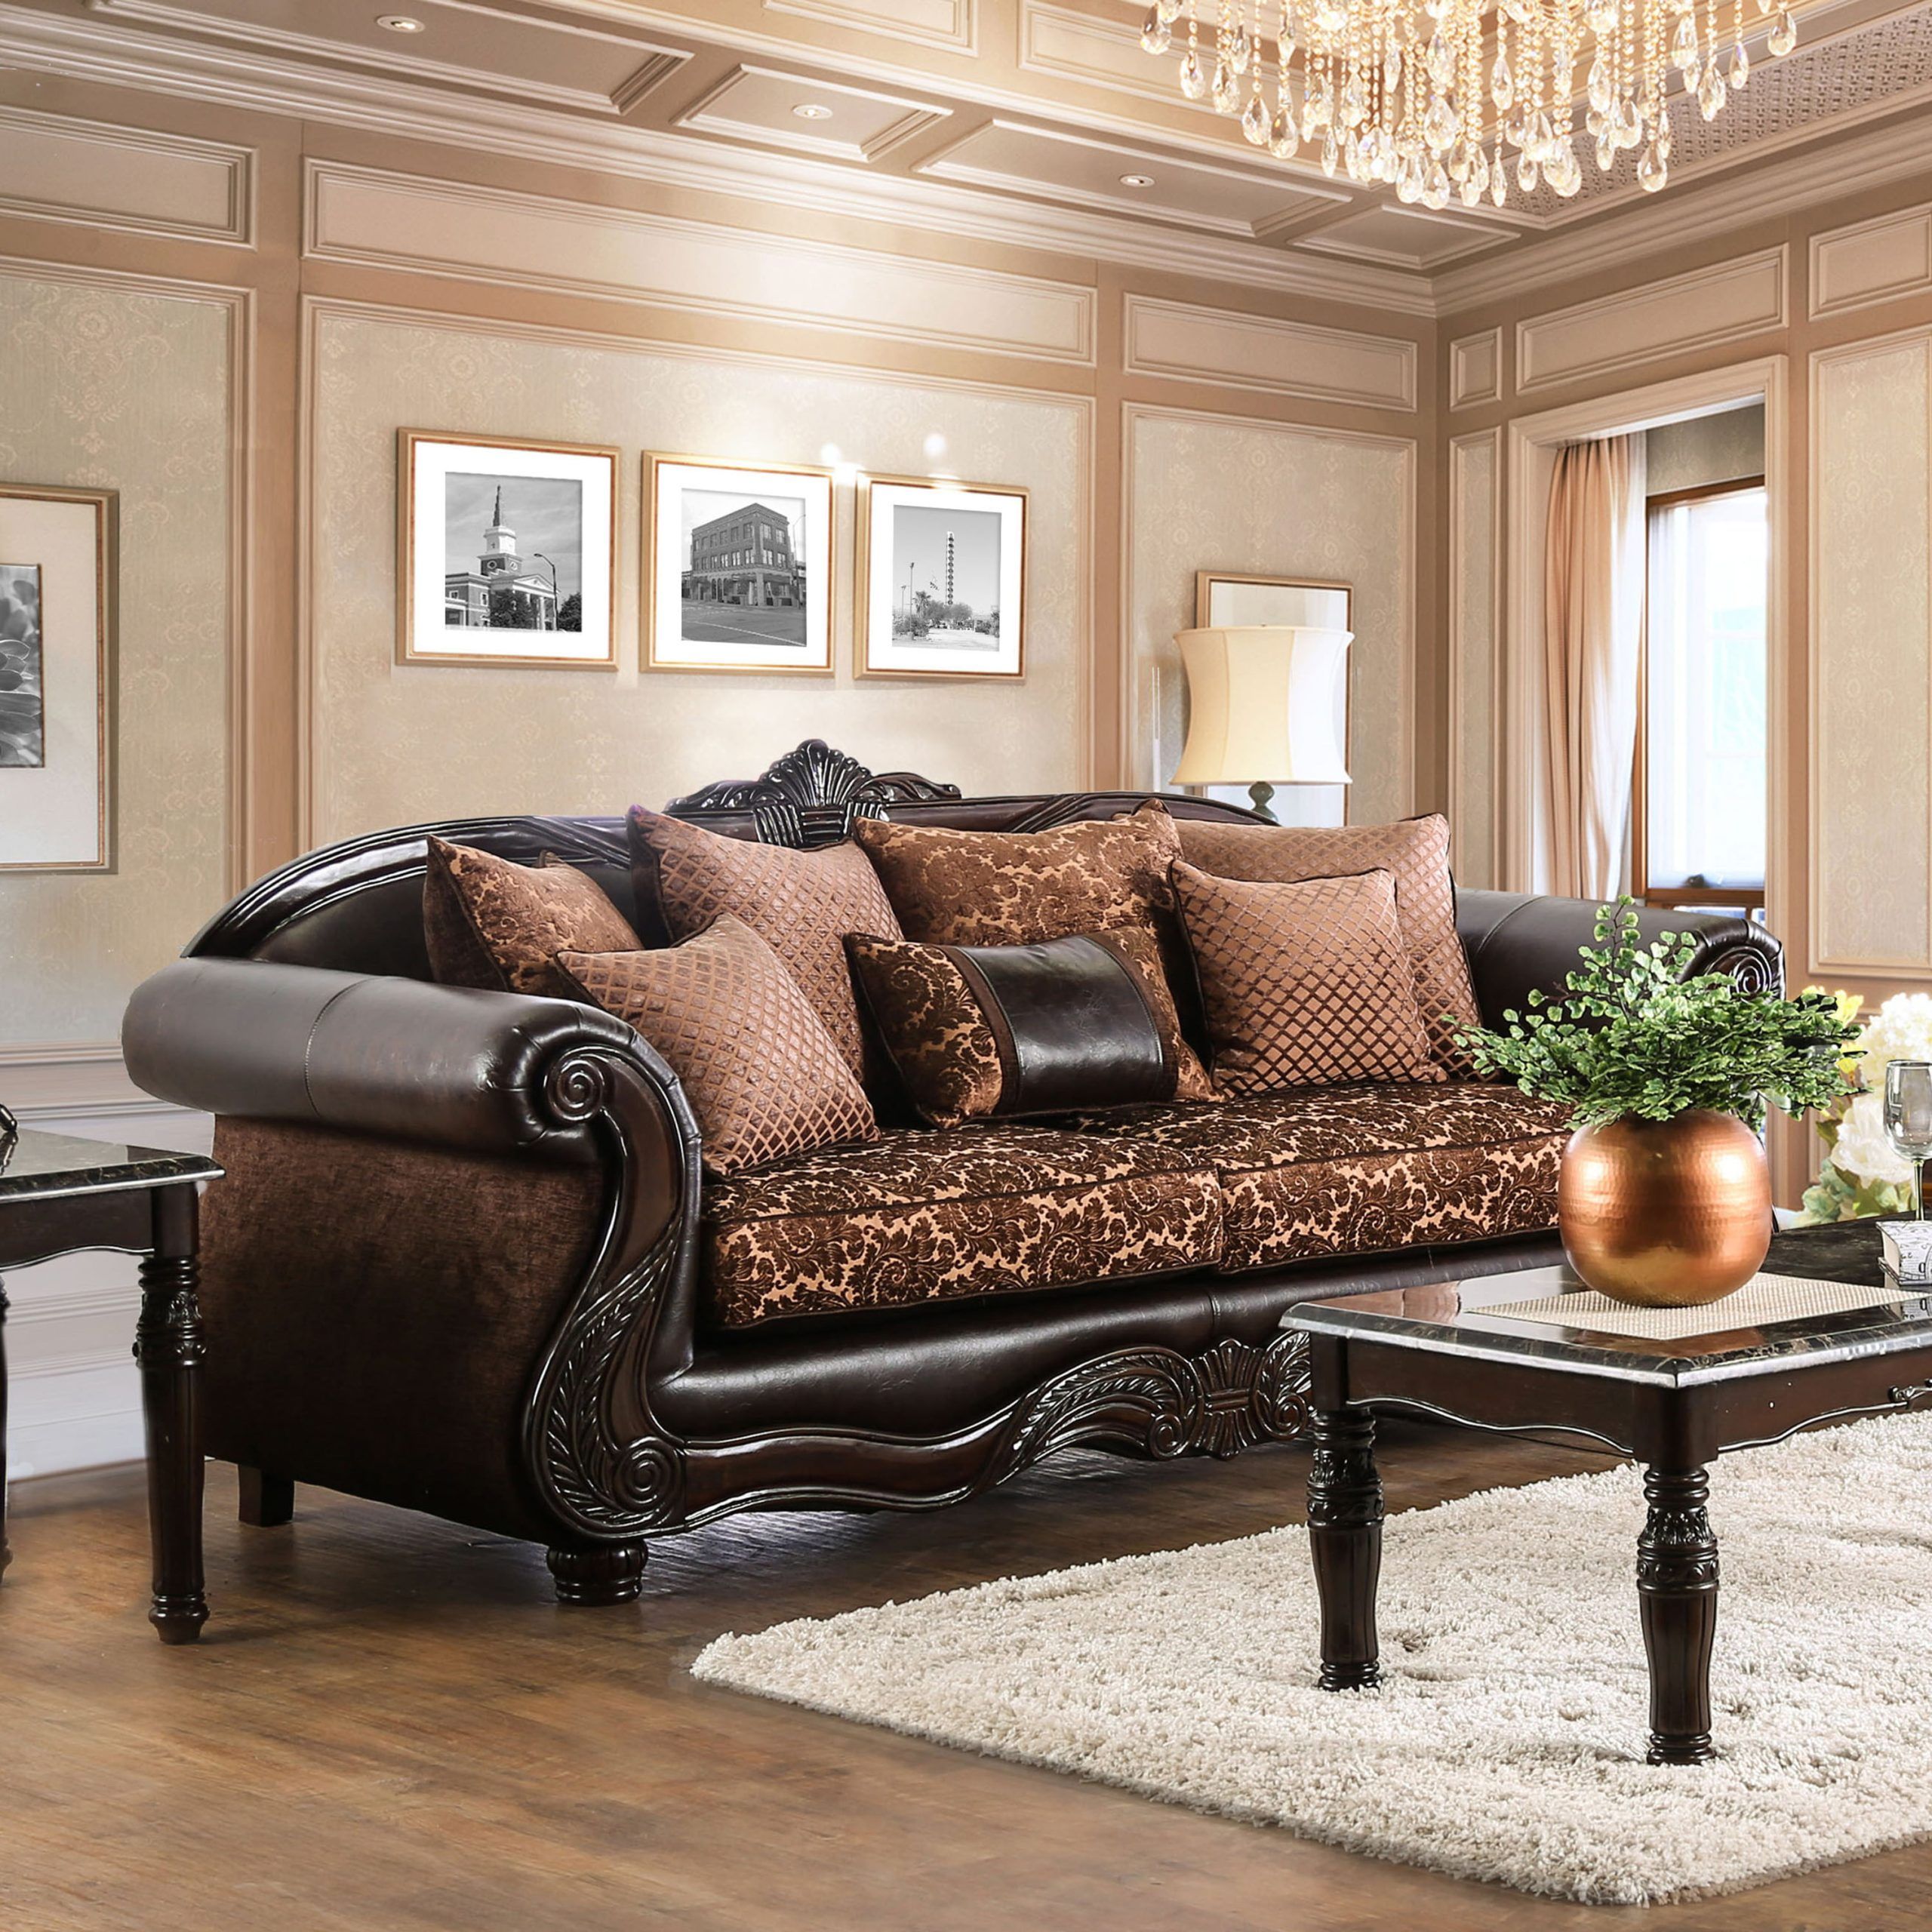 Furniture Of America Traditional Faux Leather Hannon Sofa, Brown Pertaining To Faux Leather Sofas In Dark Brown (Gallery 4 of 20)